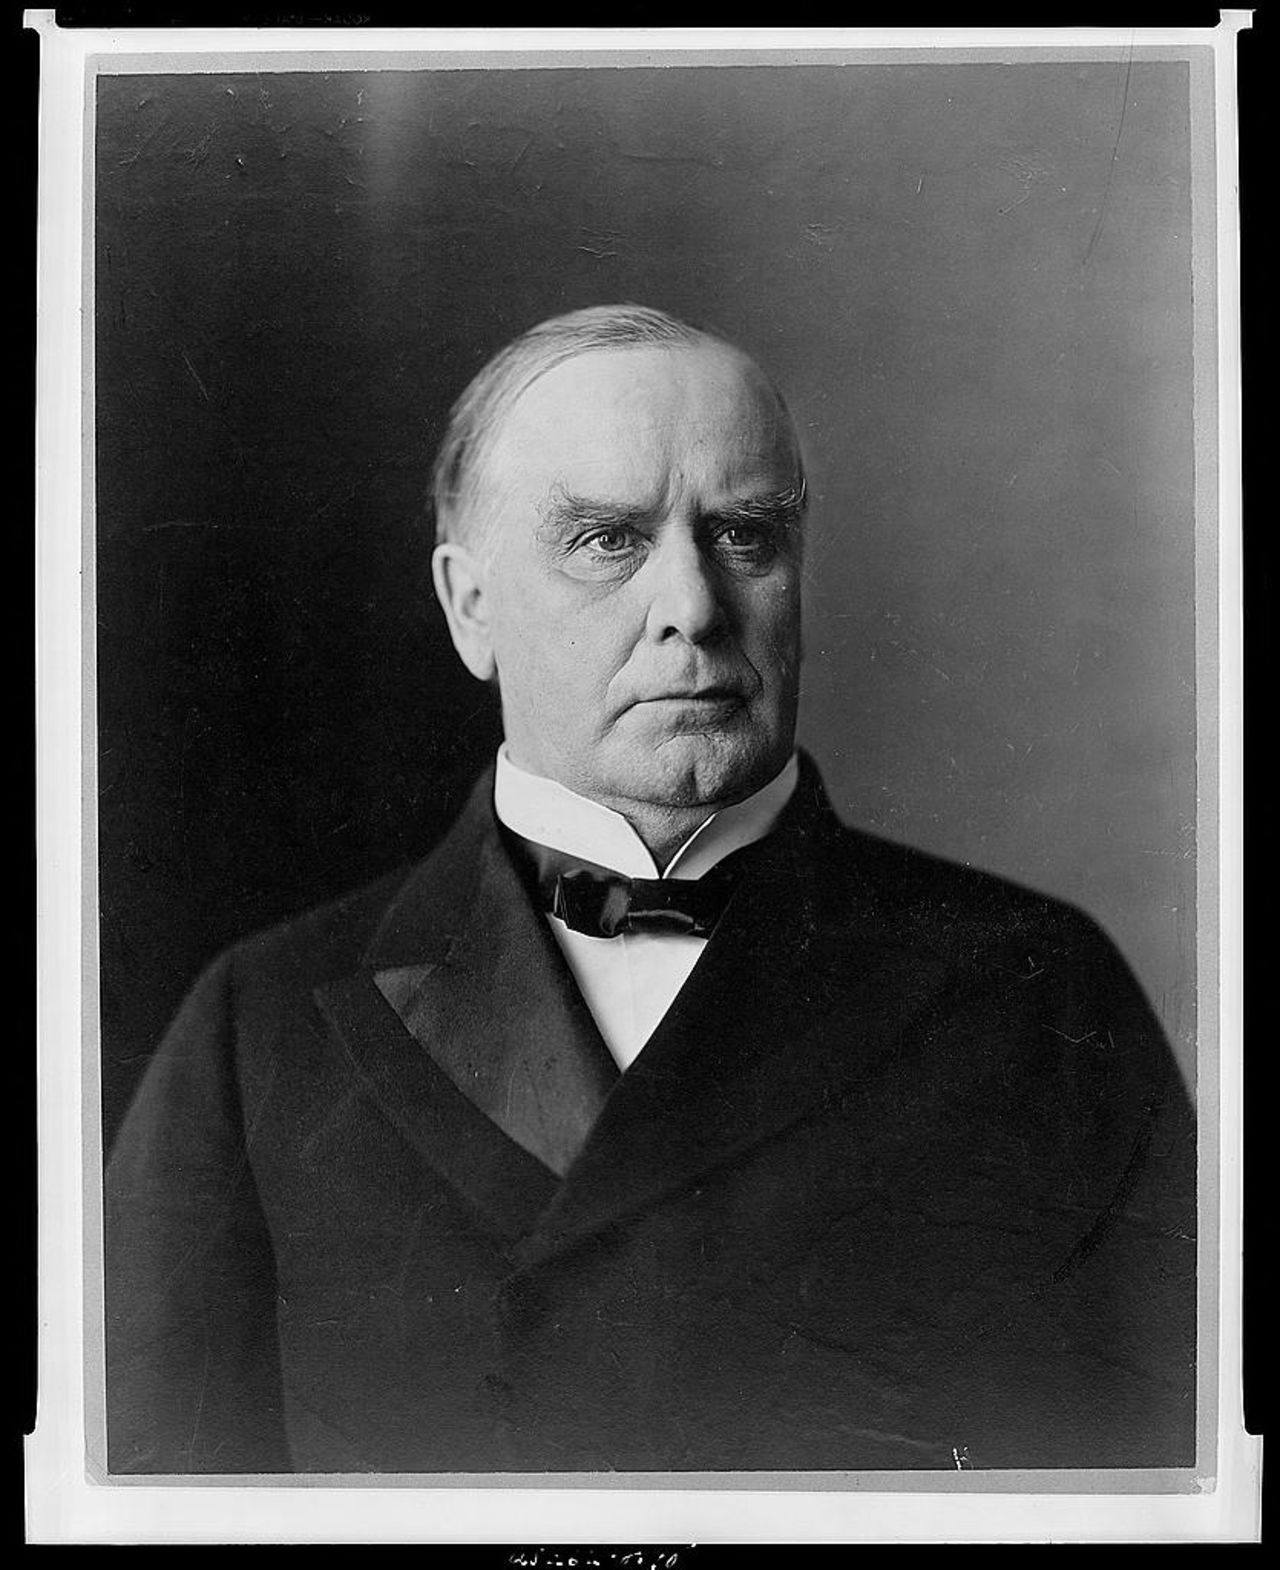 "Patriotism, Protection, and Prosperity" was McKinley's slogan in 1896. He served as the 25th president until his assassination in 1901, six months into his second term.